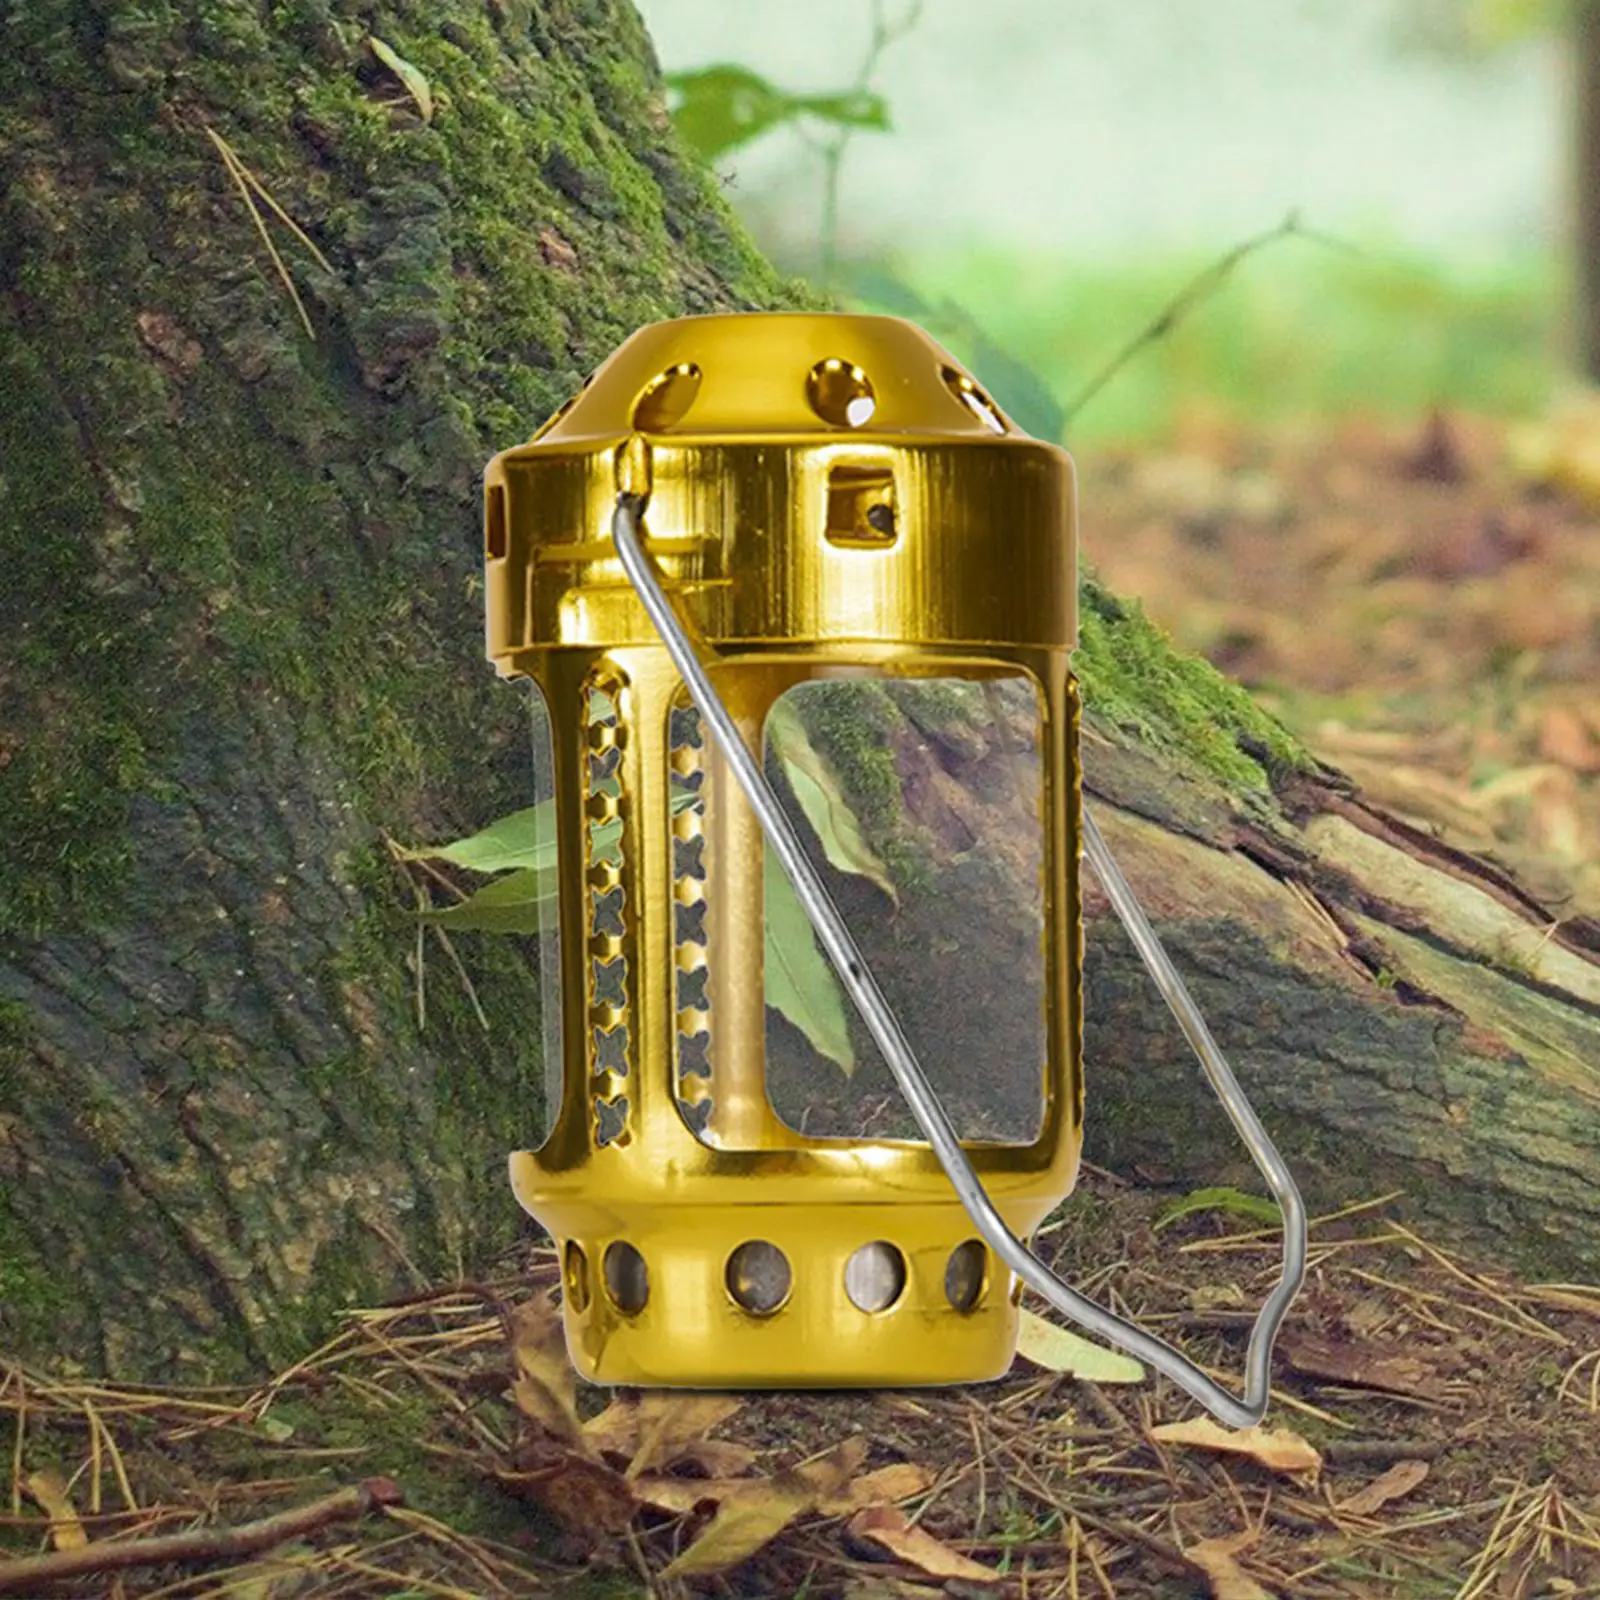 Aluminum Alloy Tealight Holder Hanging Lantern Decorative Tent Lamps for Camping